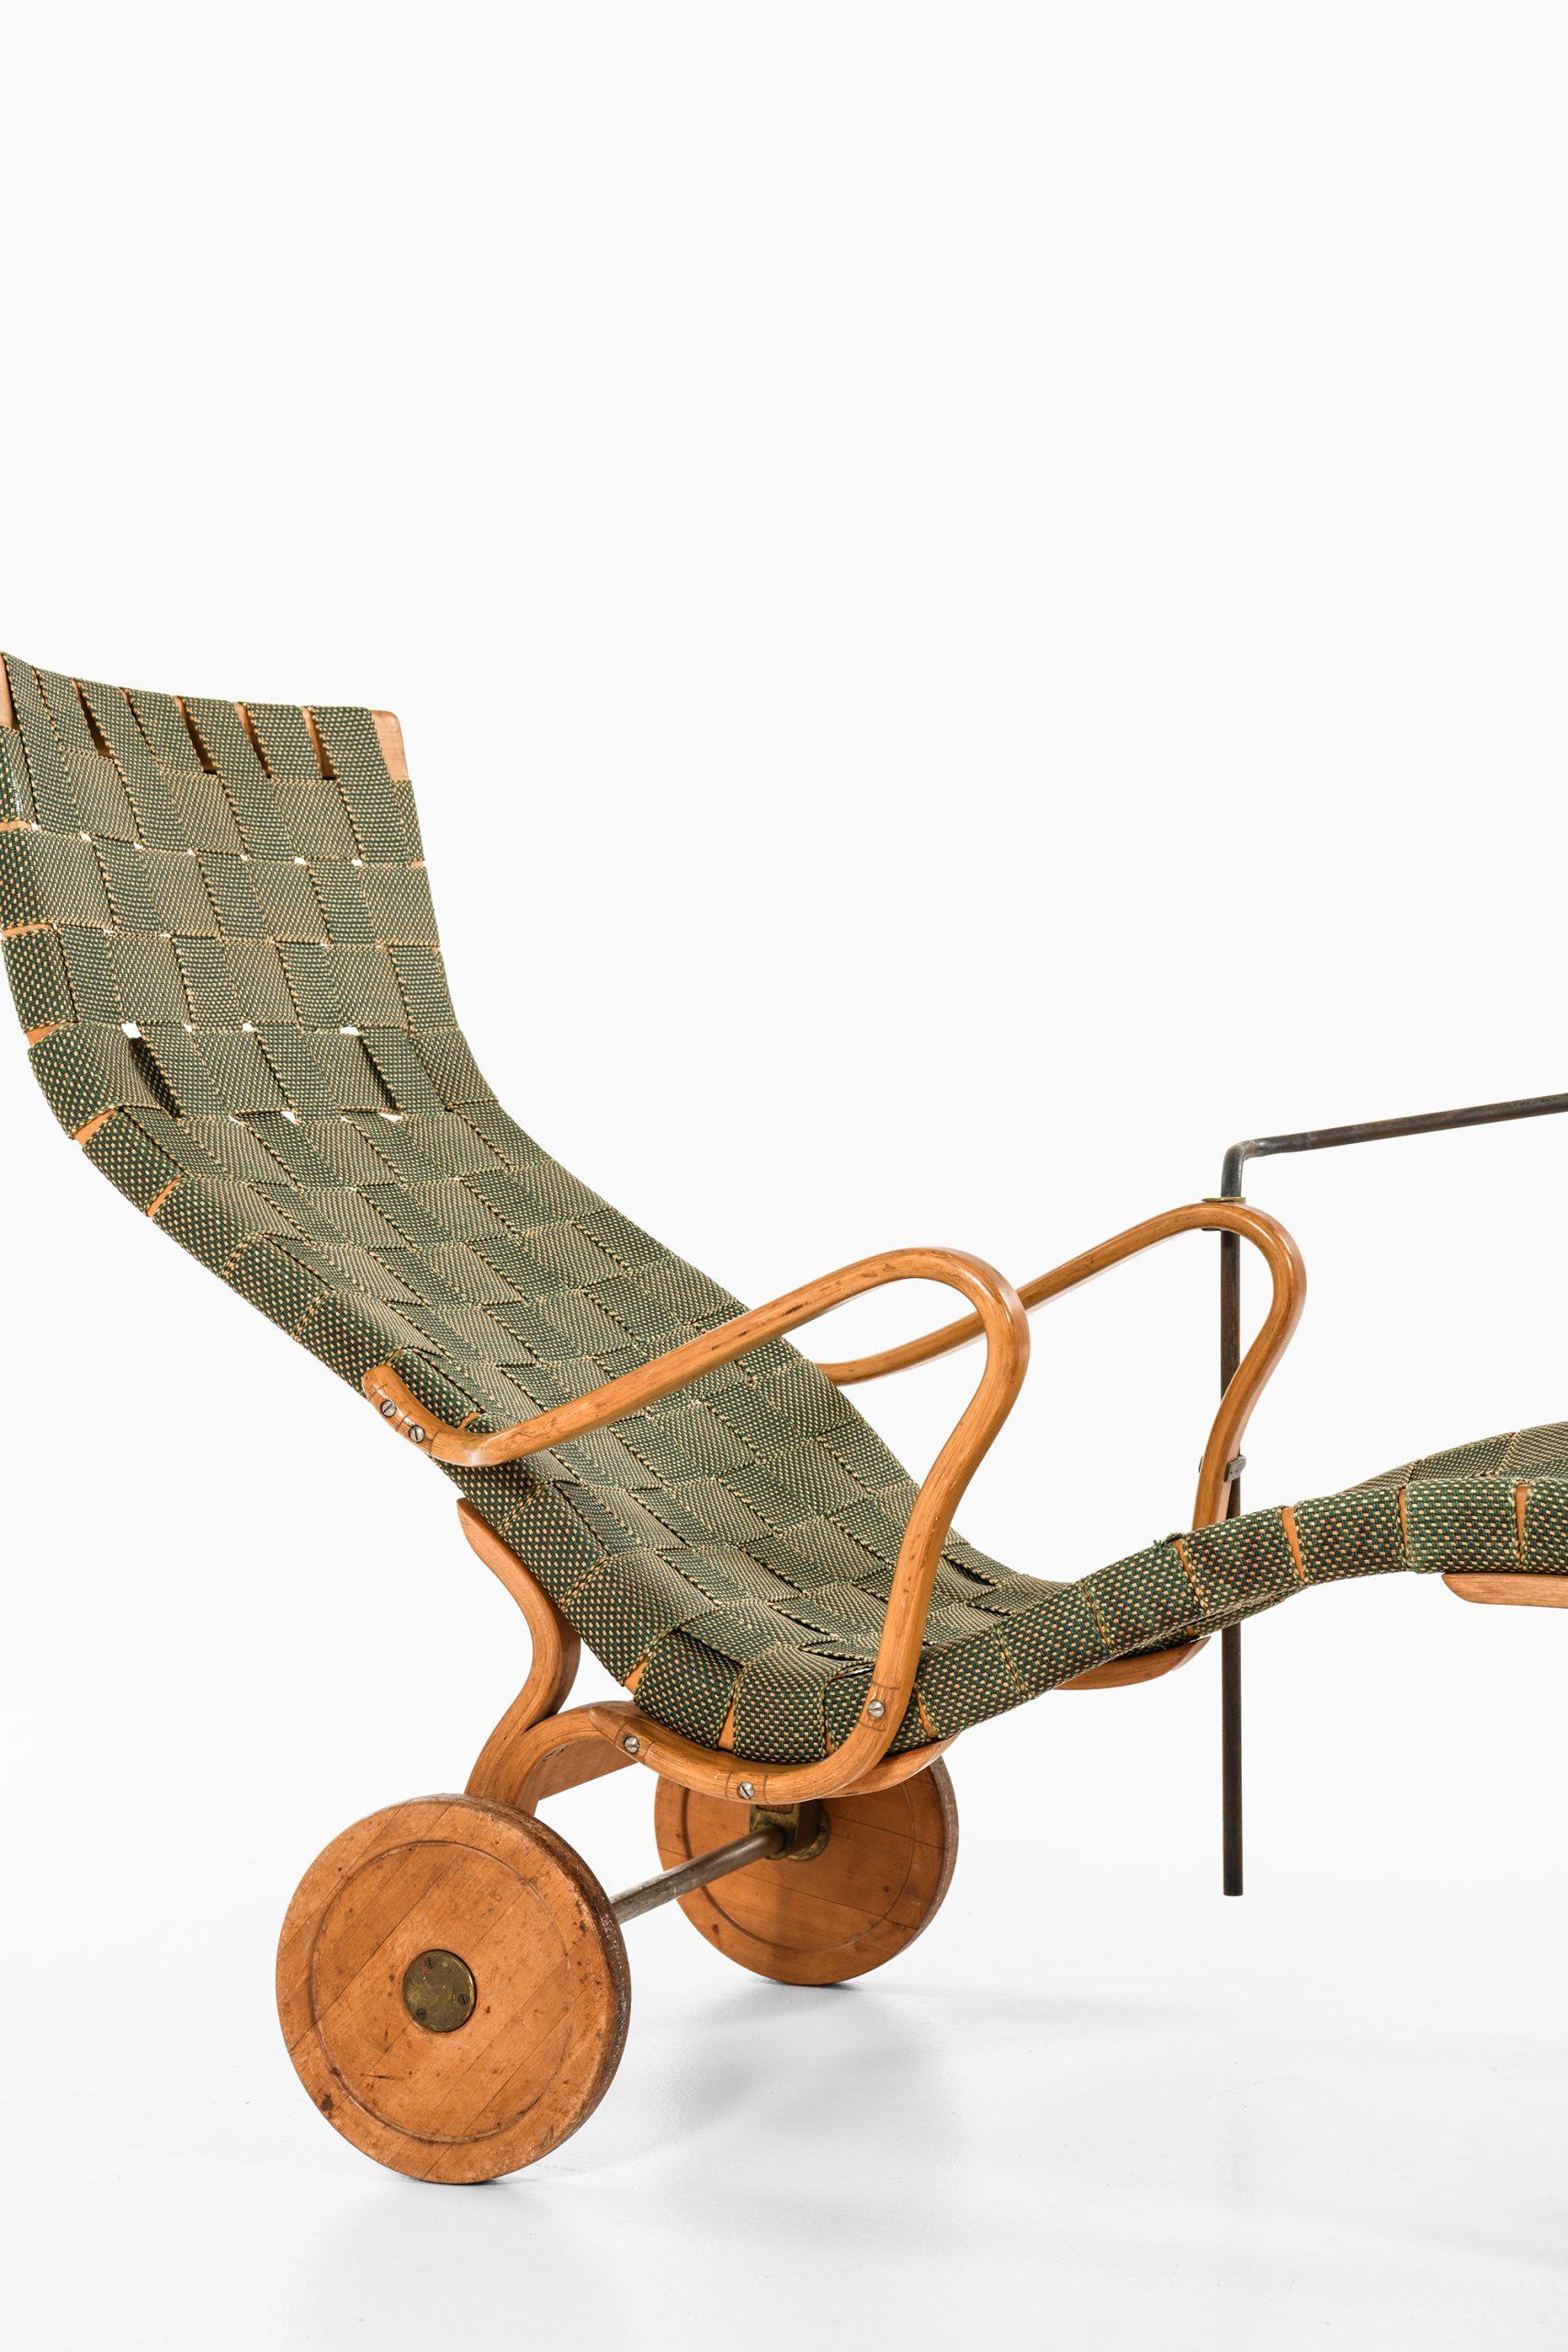 Very rare lounge chair model Pernilla designed by Bruno Mathsson. Produced by Karl Mathsson in Värnamo, Sweden. Rare model with wheel and reading stand.